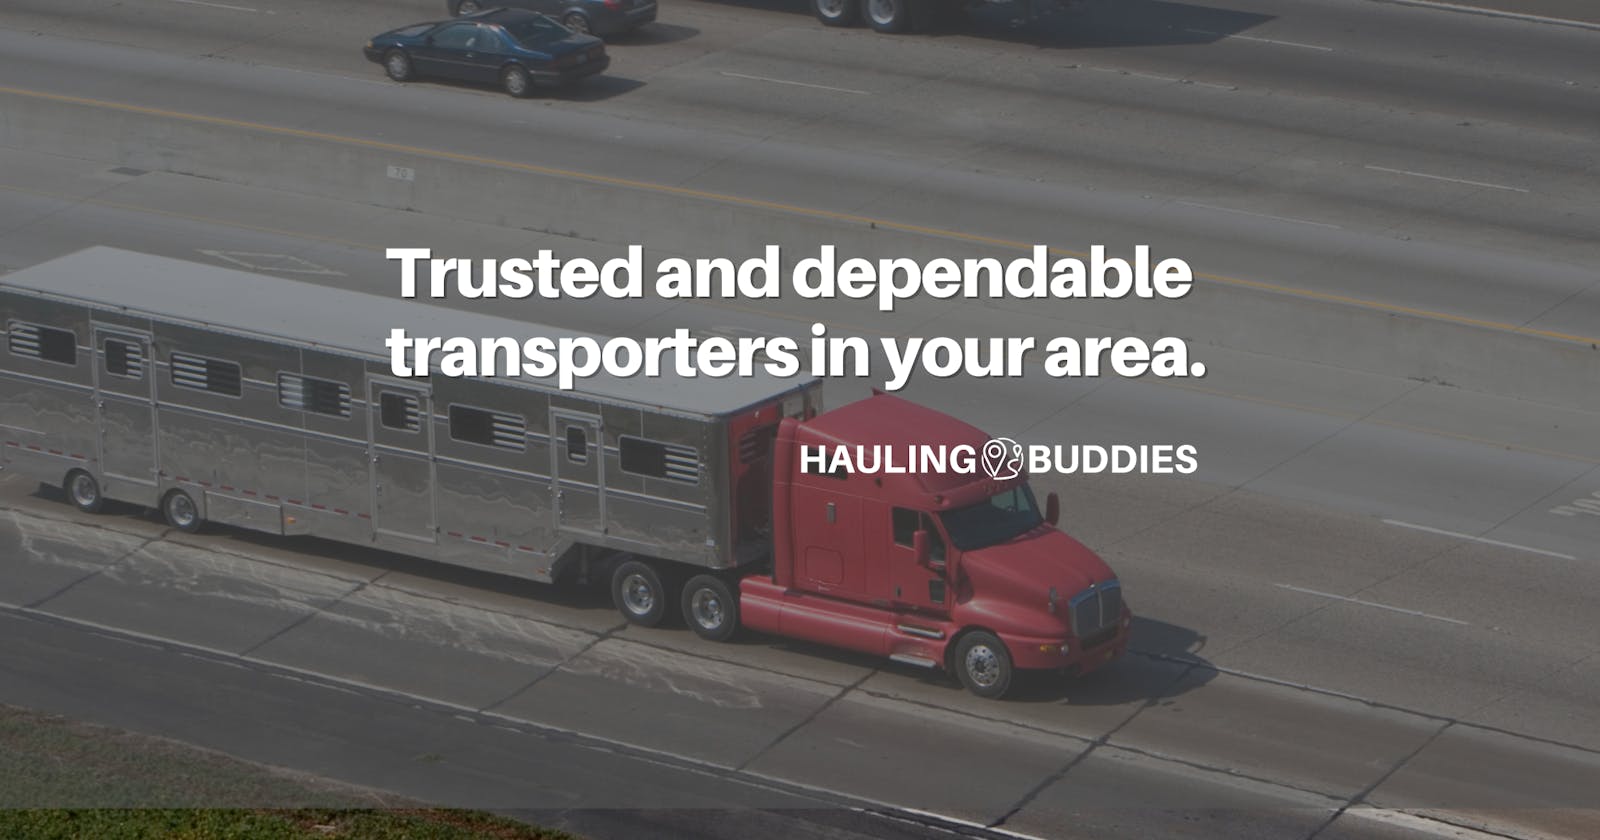 What is Hauling Buddies?